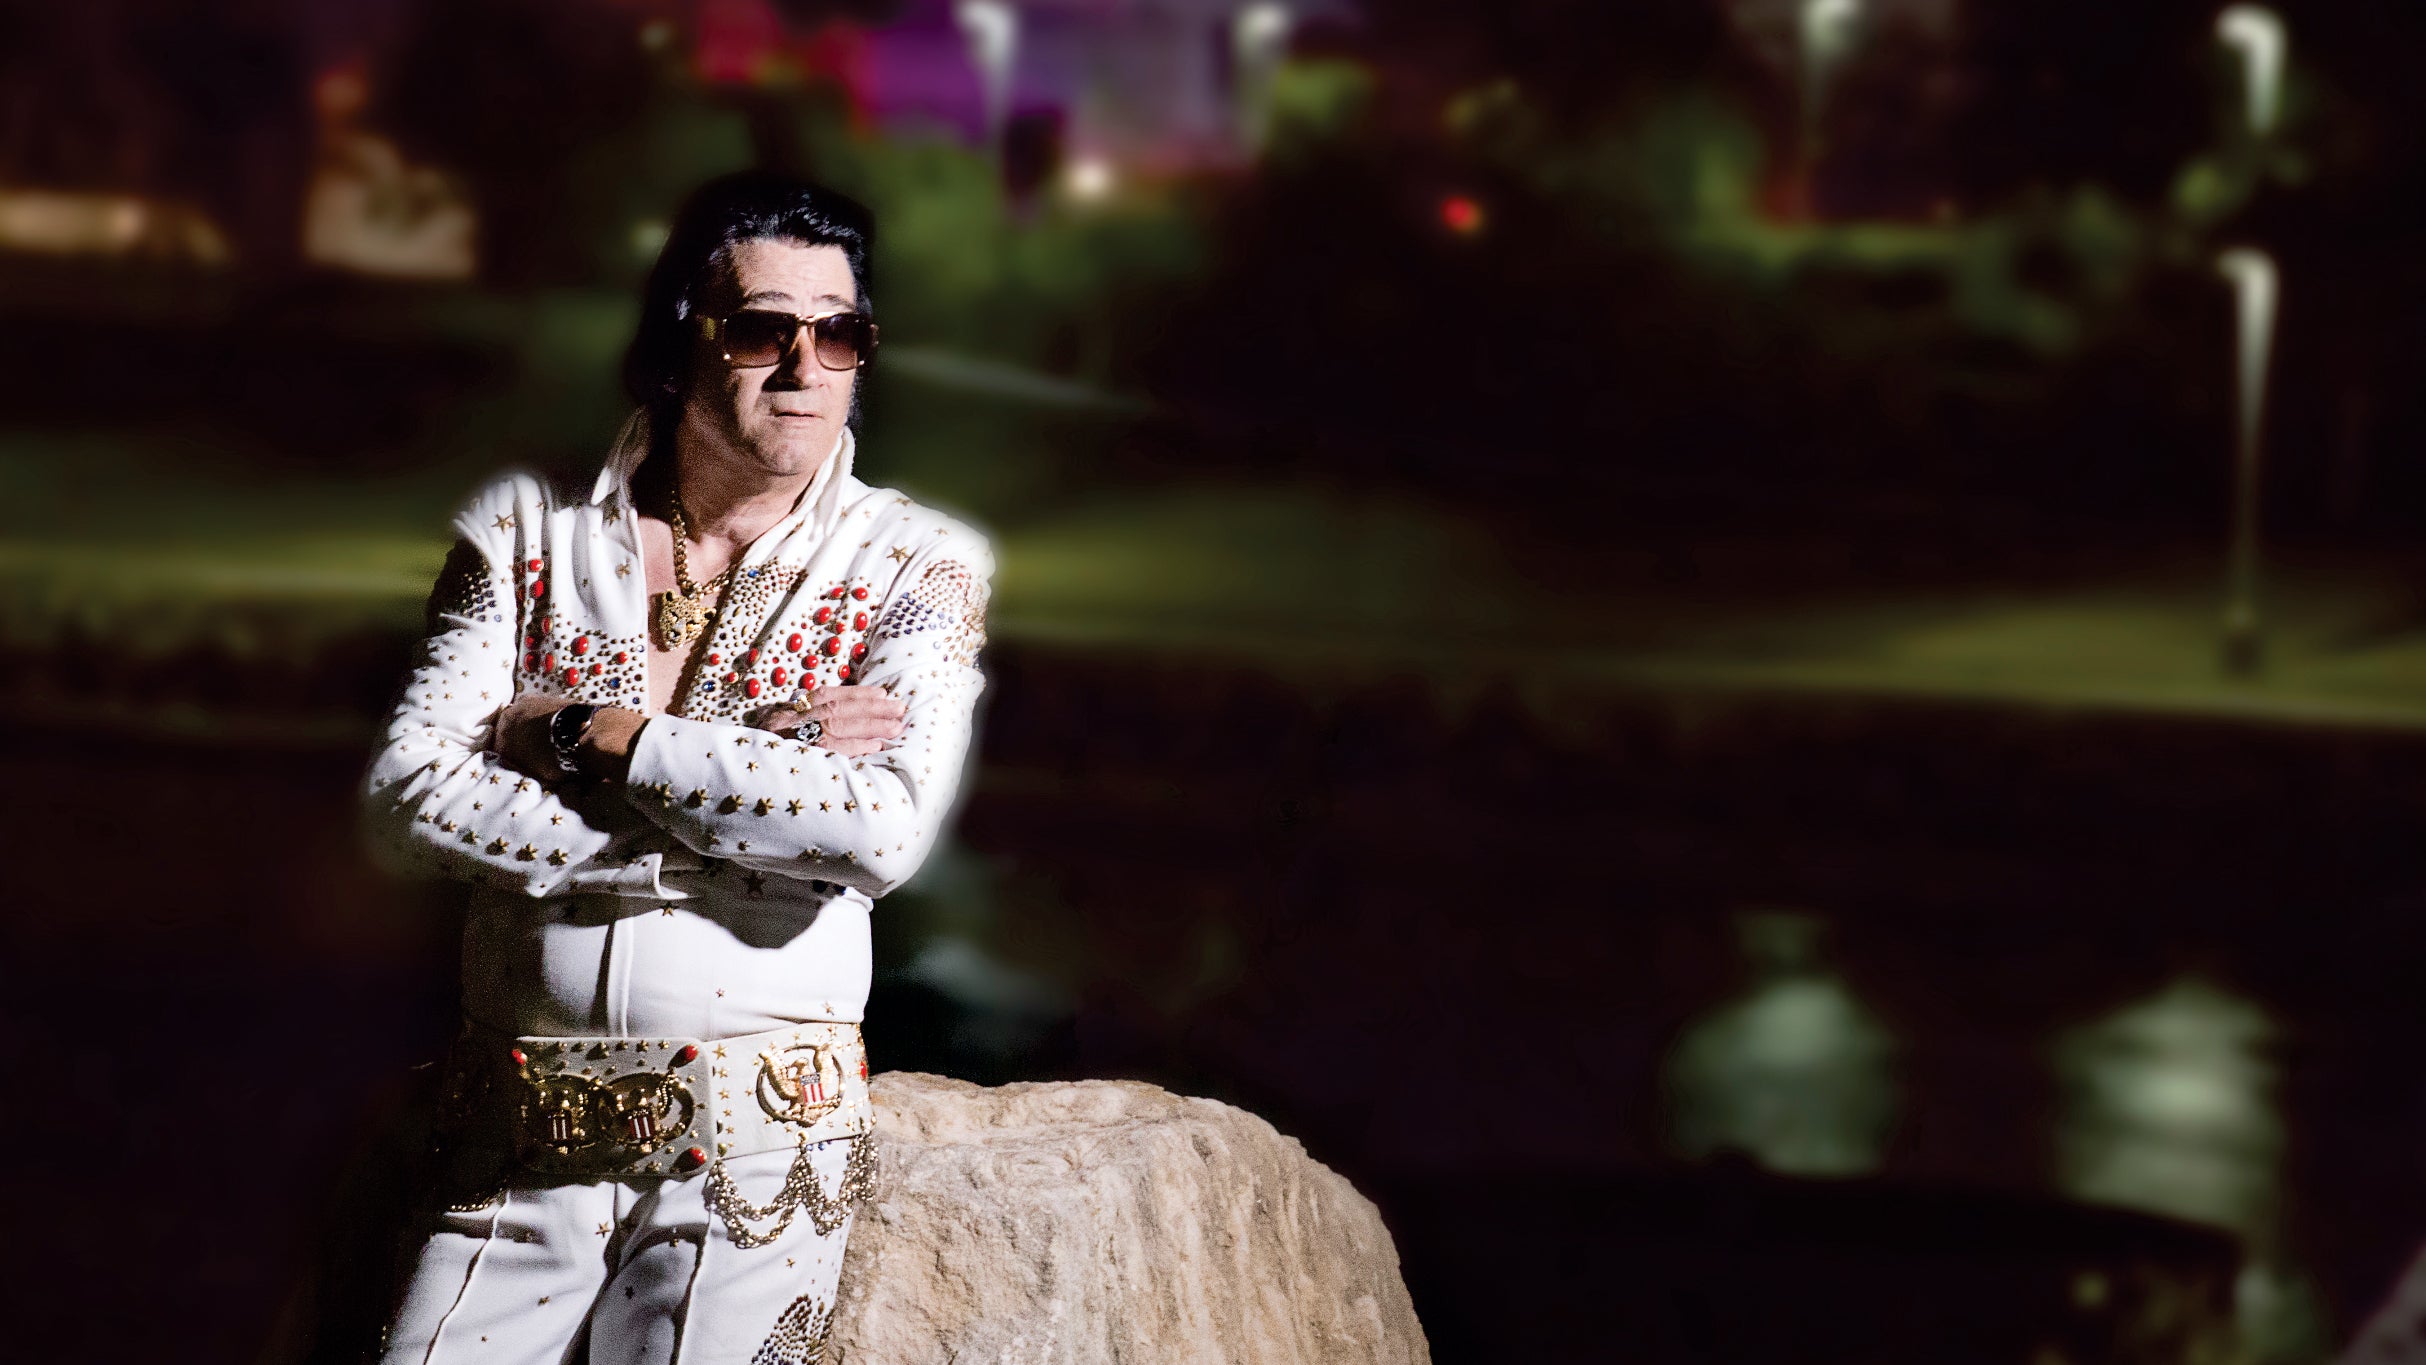 One Night with Elvis in Wichita promo photo for BOGO Black Friday Sale presale offer code